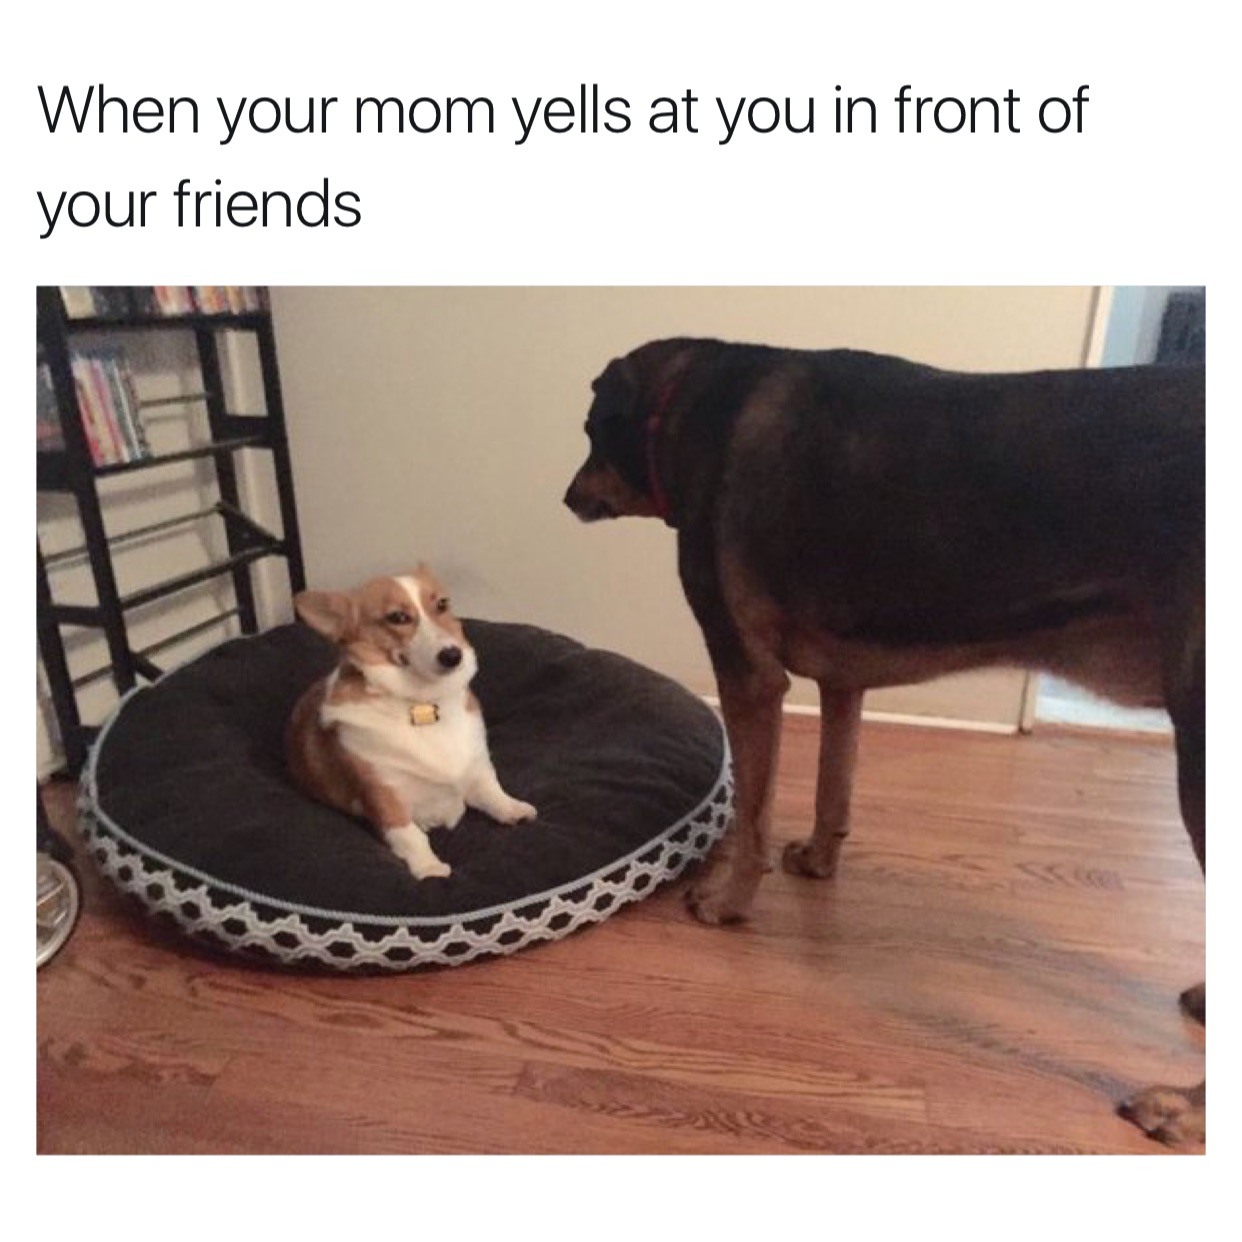 memes - dog mom meme funny - When your mom yells at you in front of your friends